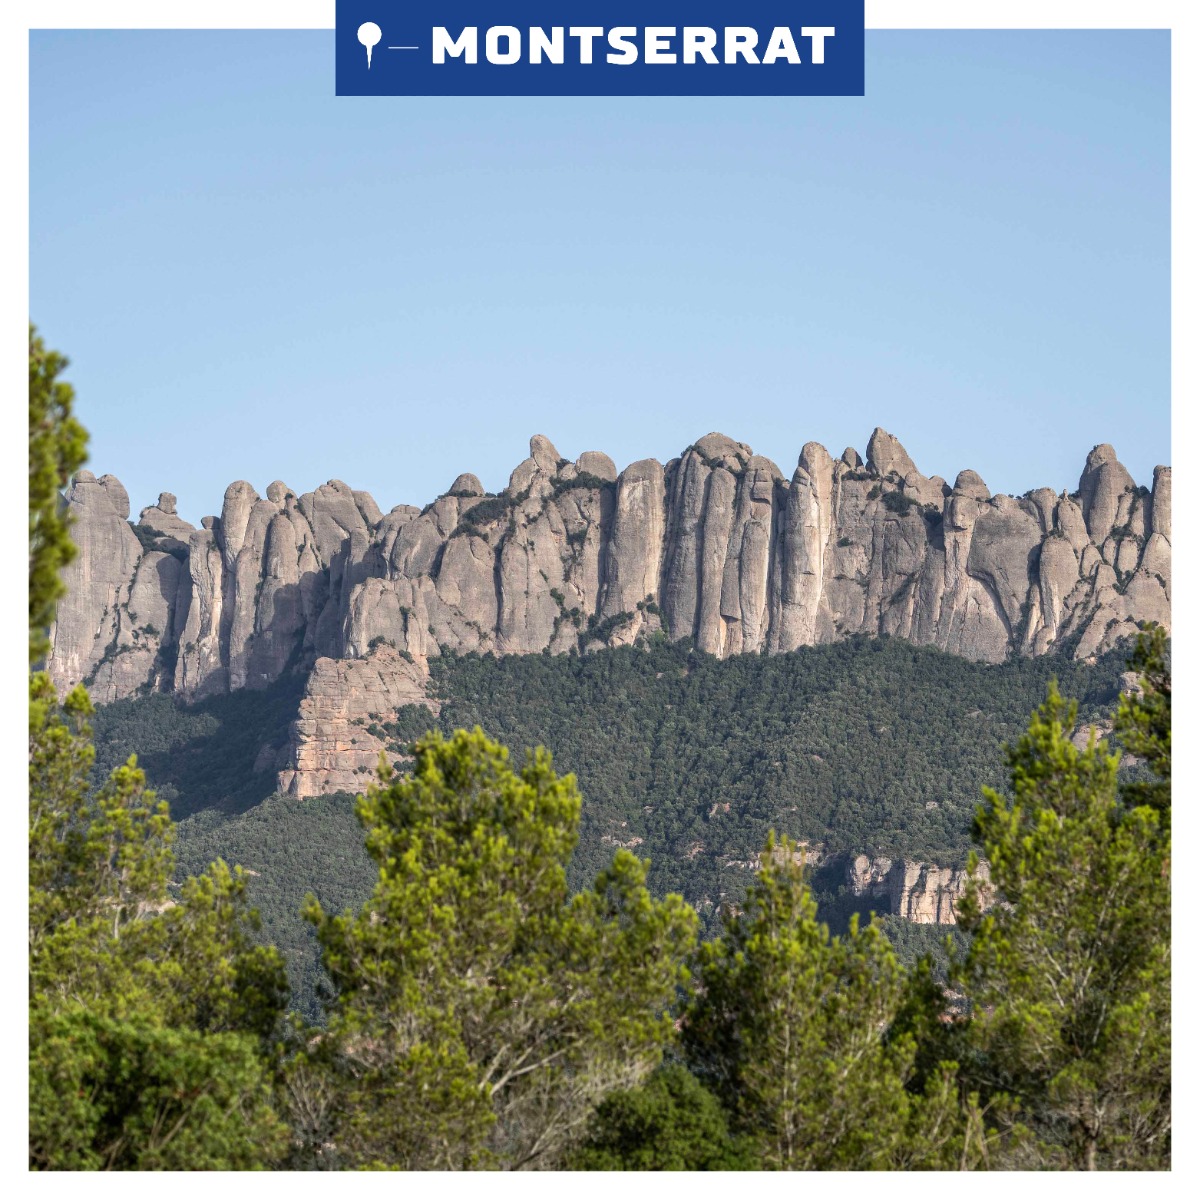 The majestic Montserrat mountain range, with its jagged, limestone peaks shrouded in mist, exudes an aura of mystery against a backdrop of serene, green hills.